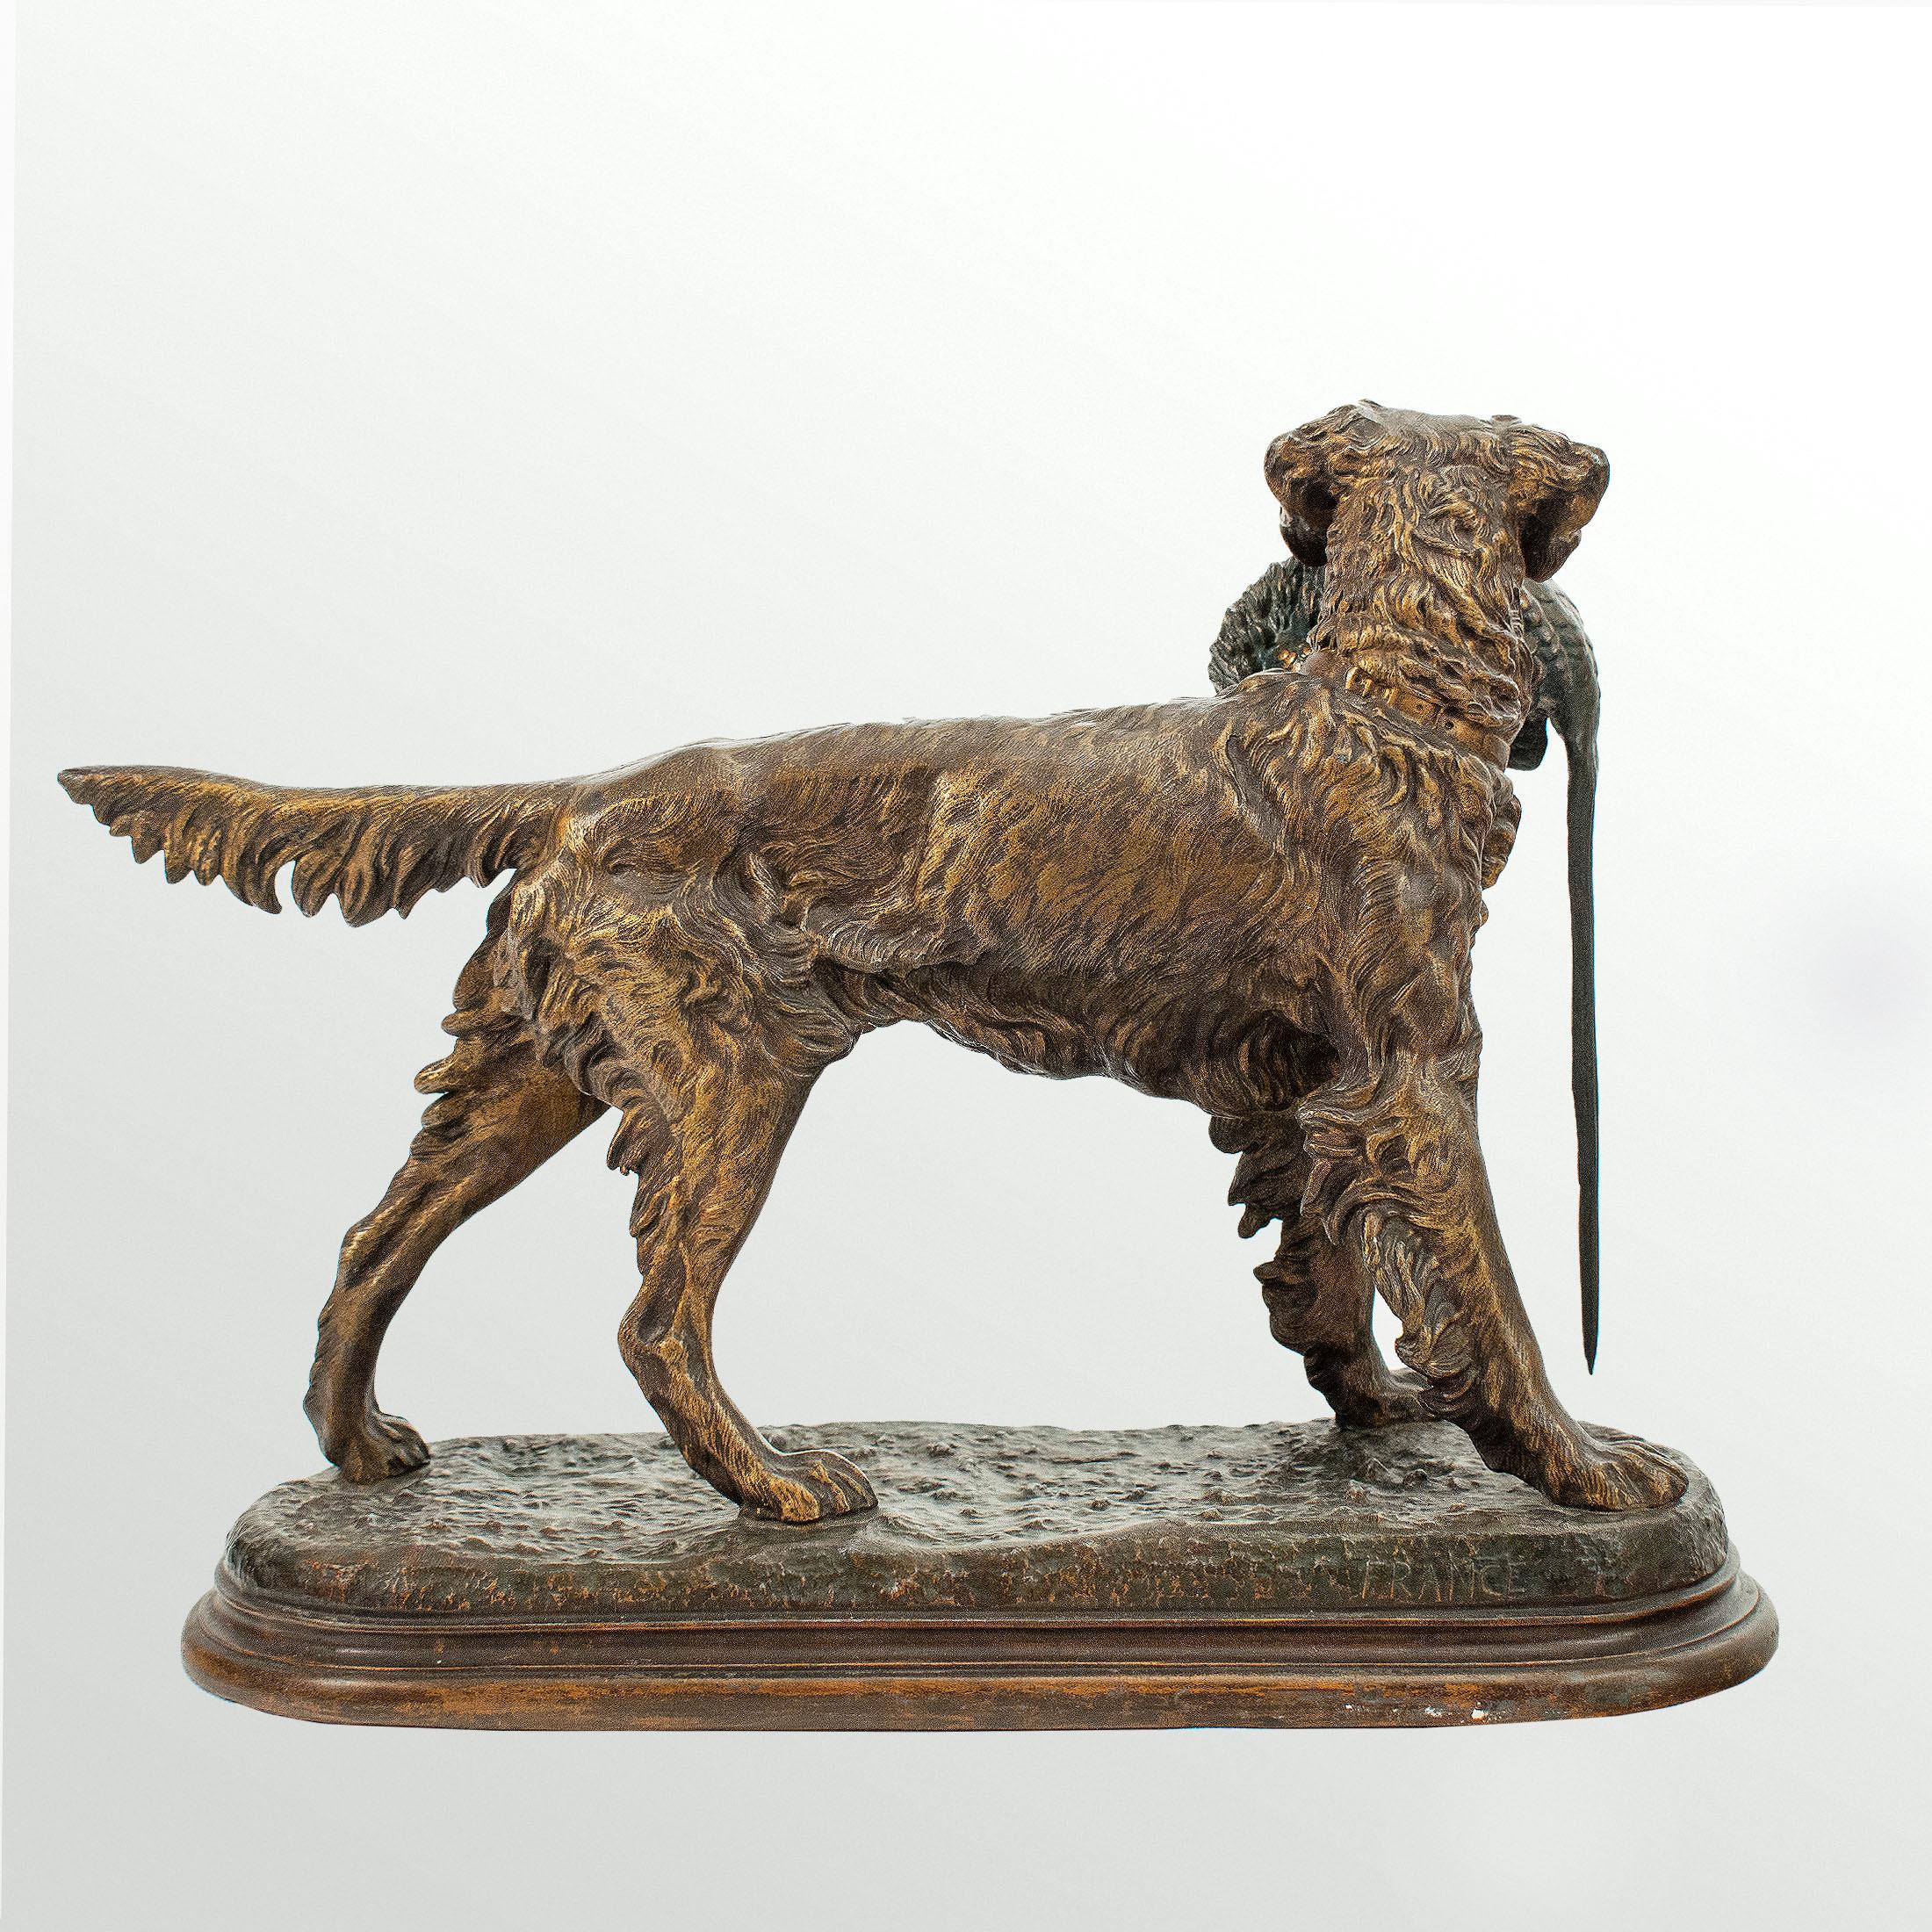 Large Statue in patinated spelter. Hunting dog holding a pheasant, signed Jules MOIGNIEZ (1835-1894).

31 cm high x 37 cm width.

Jules Moigniez was a 19th-century French animal sculptor. His work was primarily cast in bronze, and he frequently